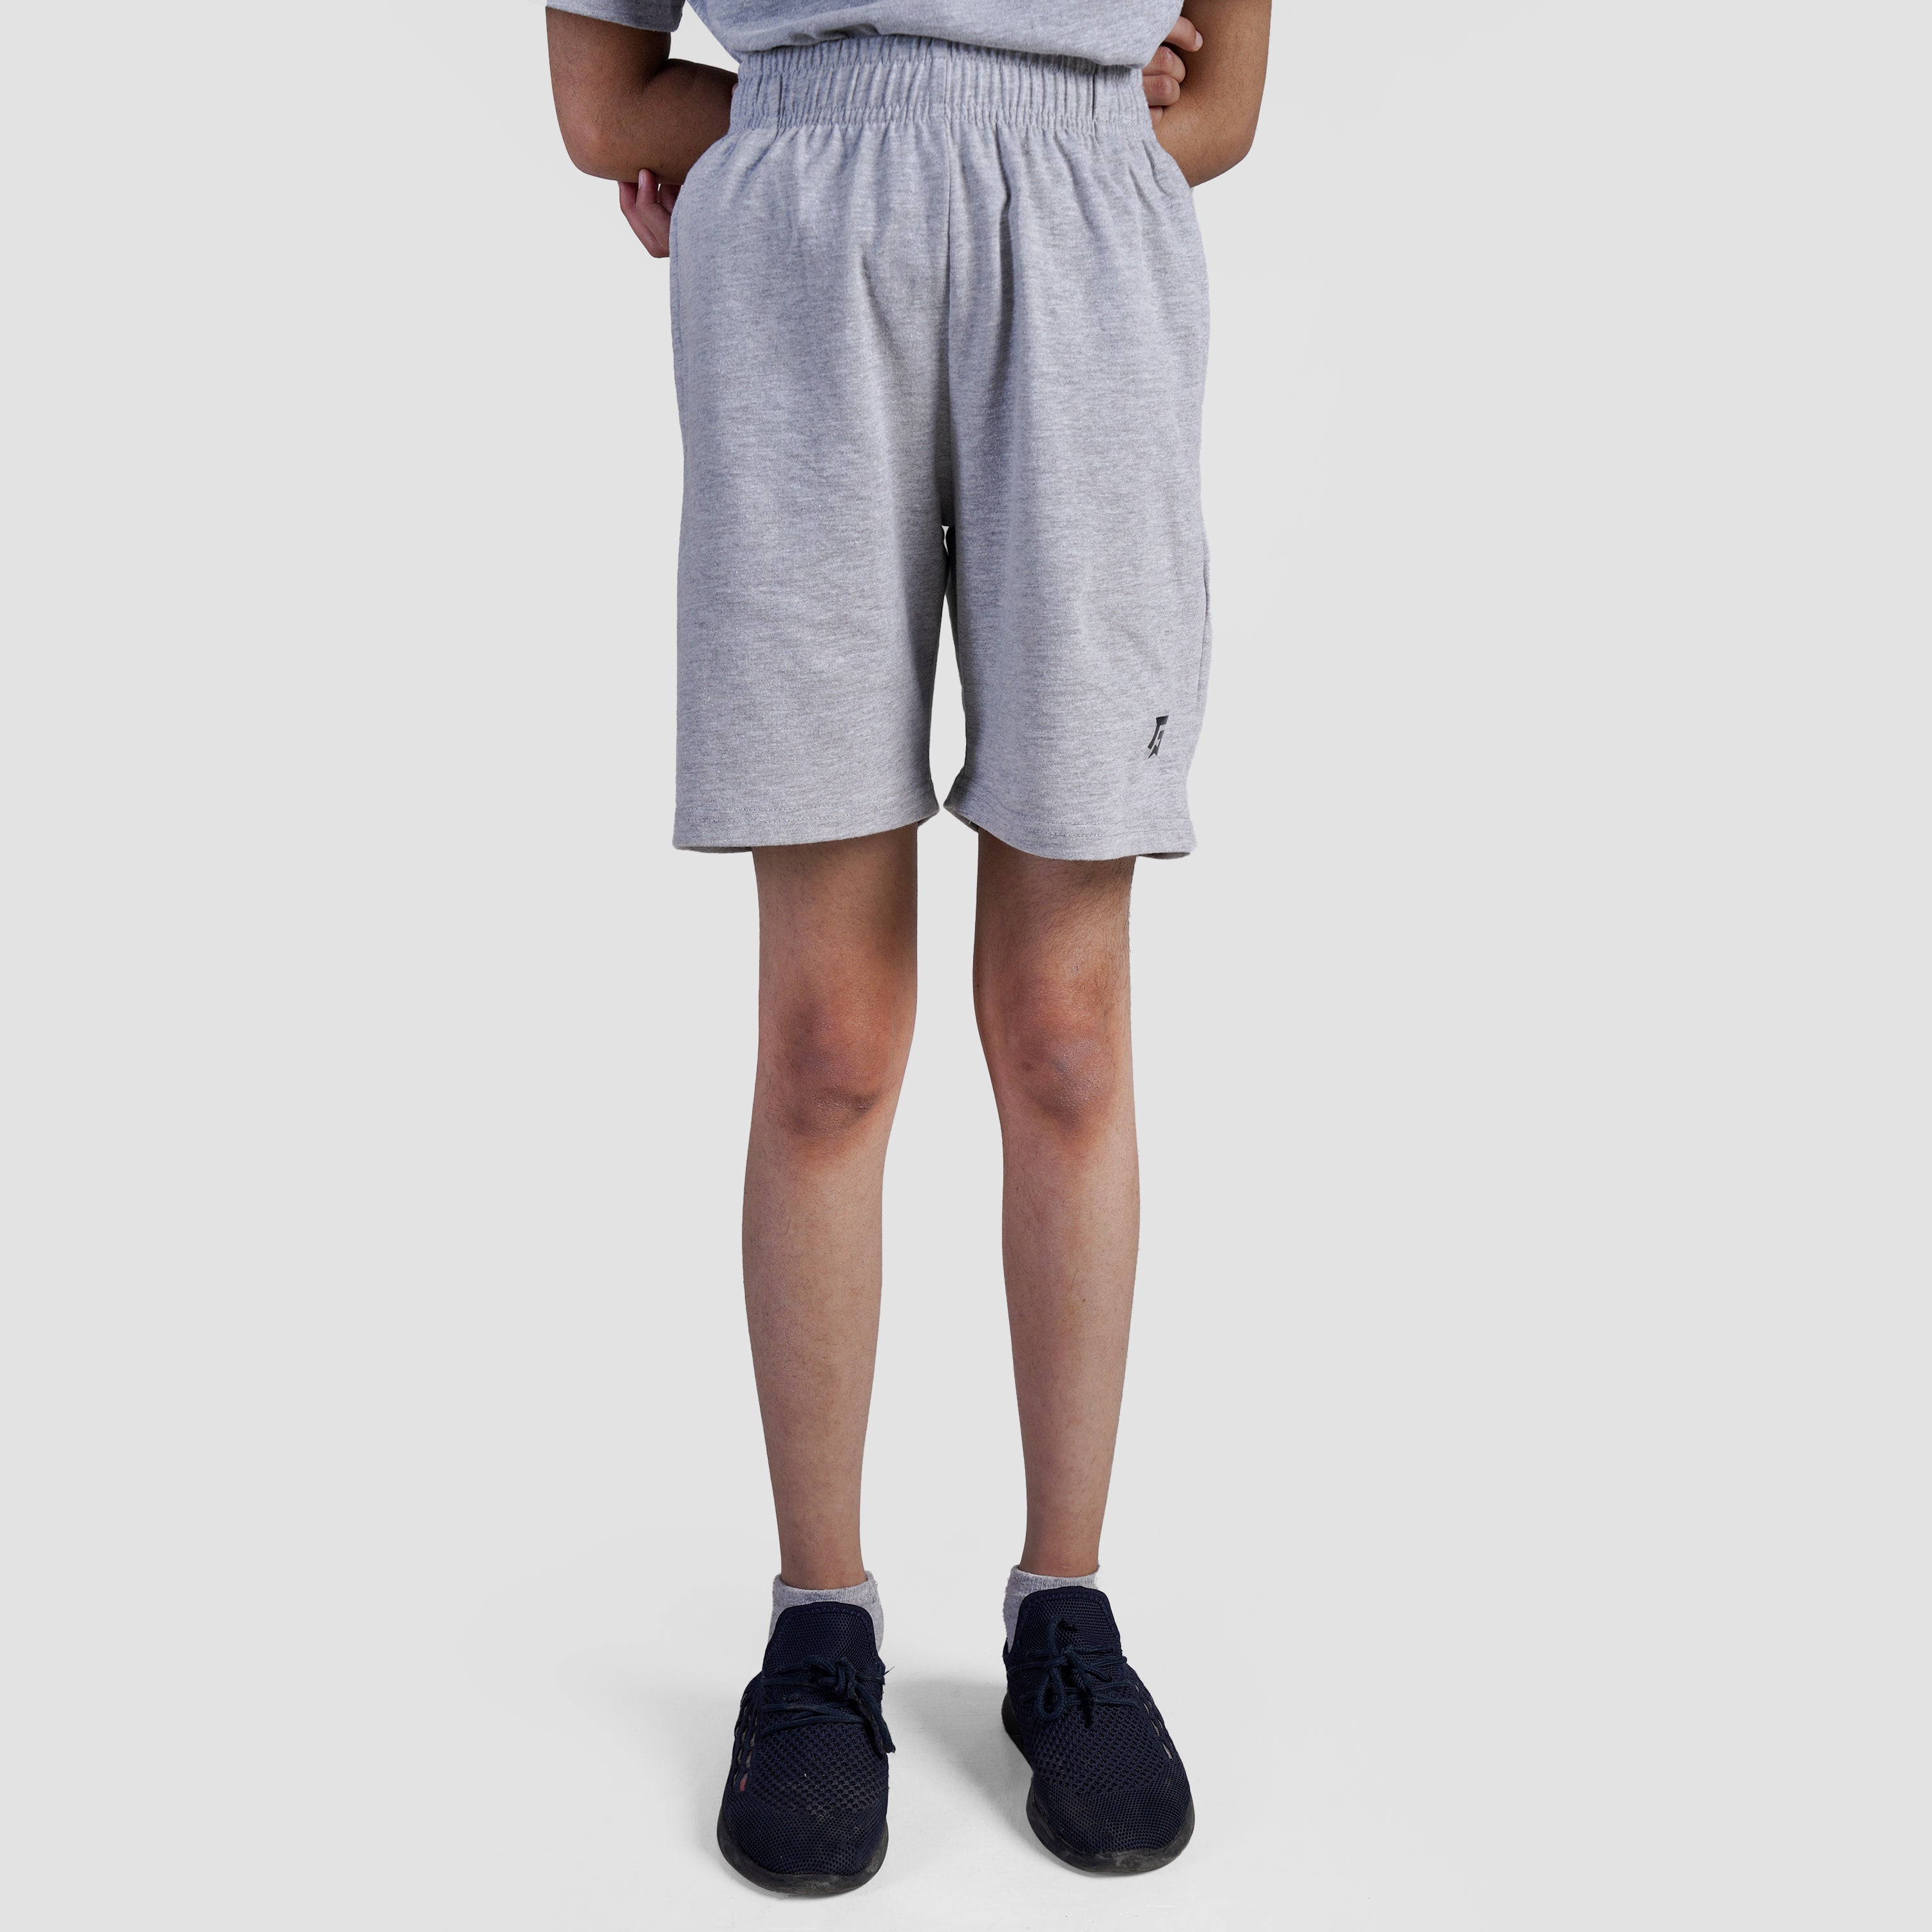 Co-Groove Shorts (Grey)